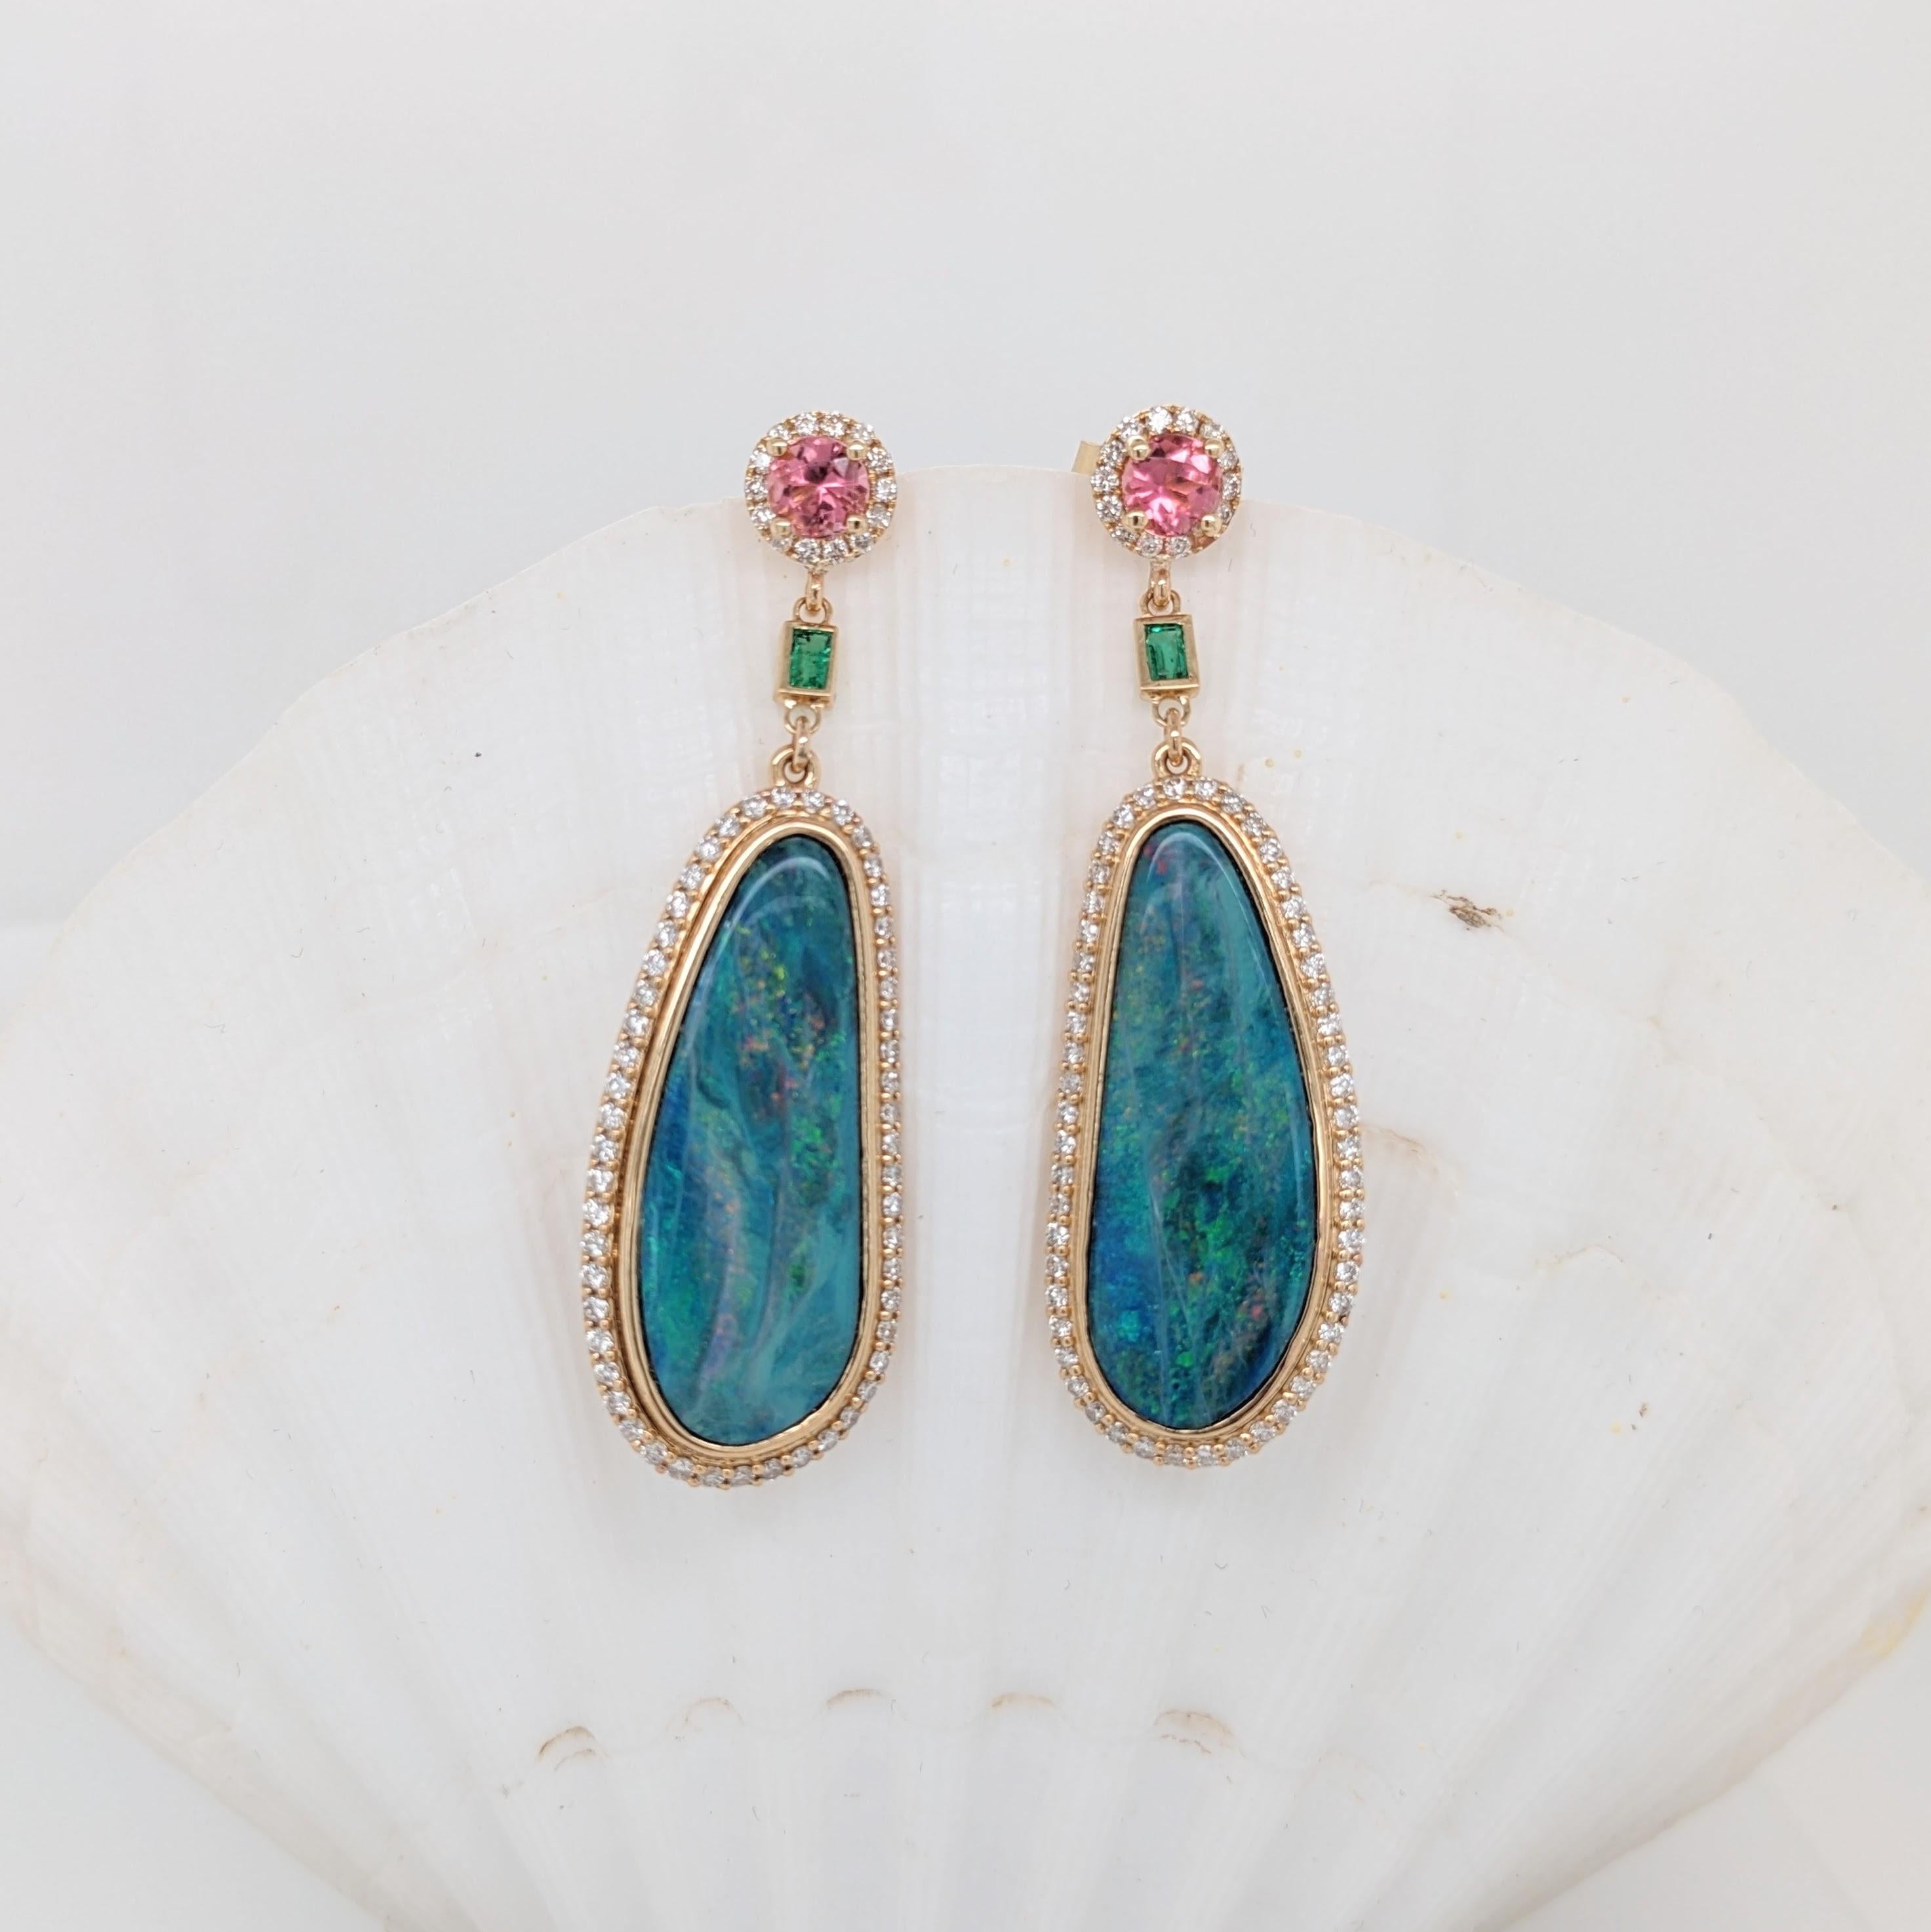 An absolutely stunning pair of earrings featuring gorgeous Boulder Opals bezel set in 14k solid yellow gold with a beautiful pink tourmaline and emerald accents. Colorful, elegant, classy and a definite conversation starter!

Item Type: